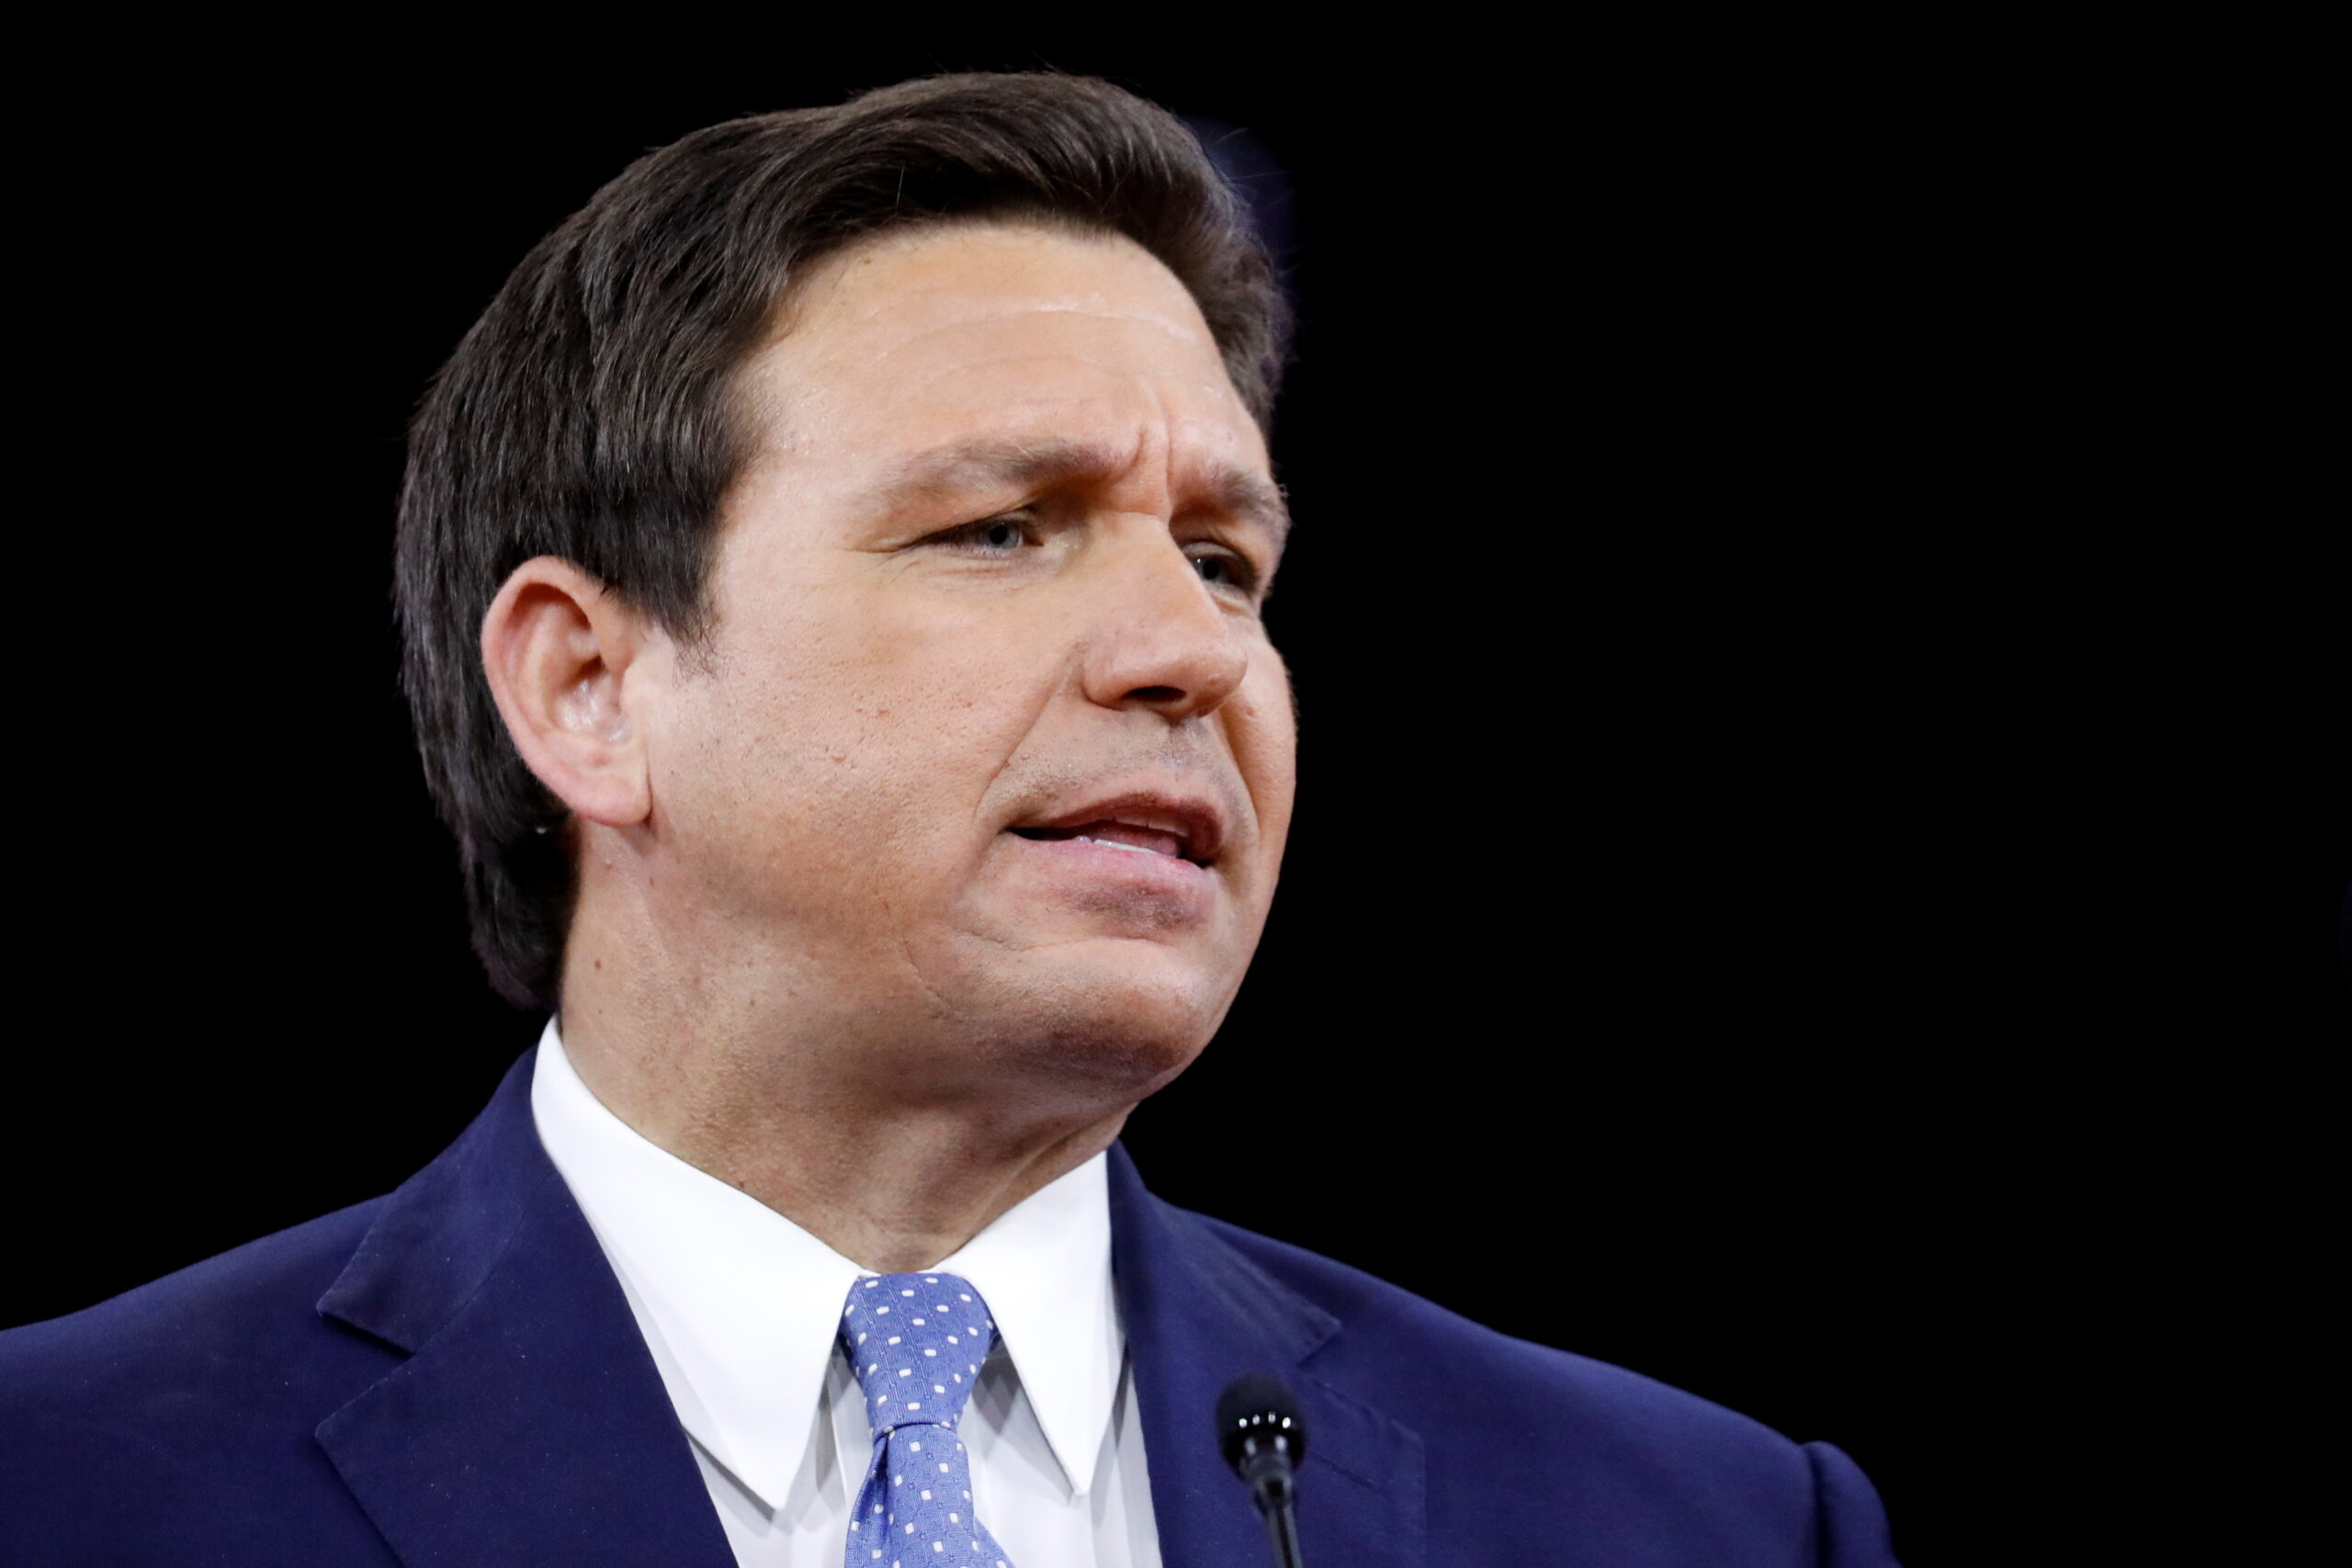 desantis-campaign-hits-back-at-soros-funded-election-‚manipulation‘-with-ad-buy-on-new-hispanic-radio-network